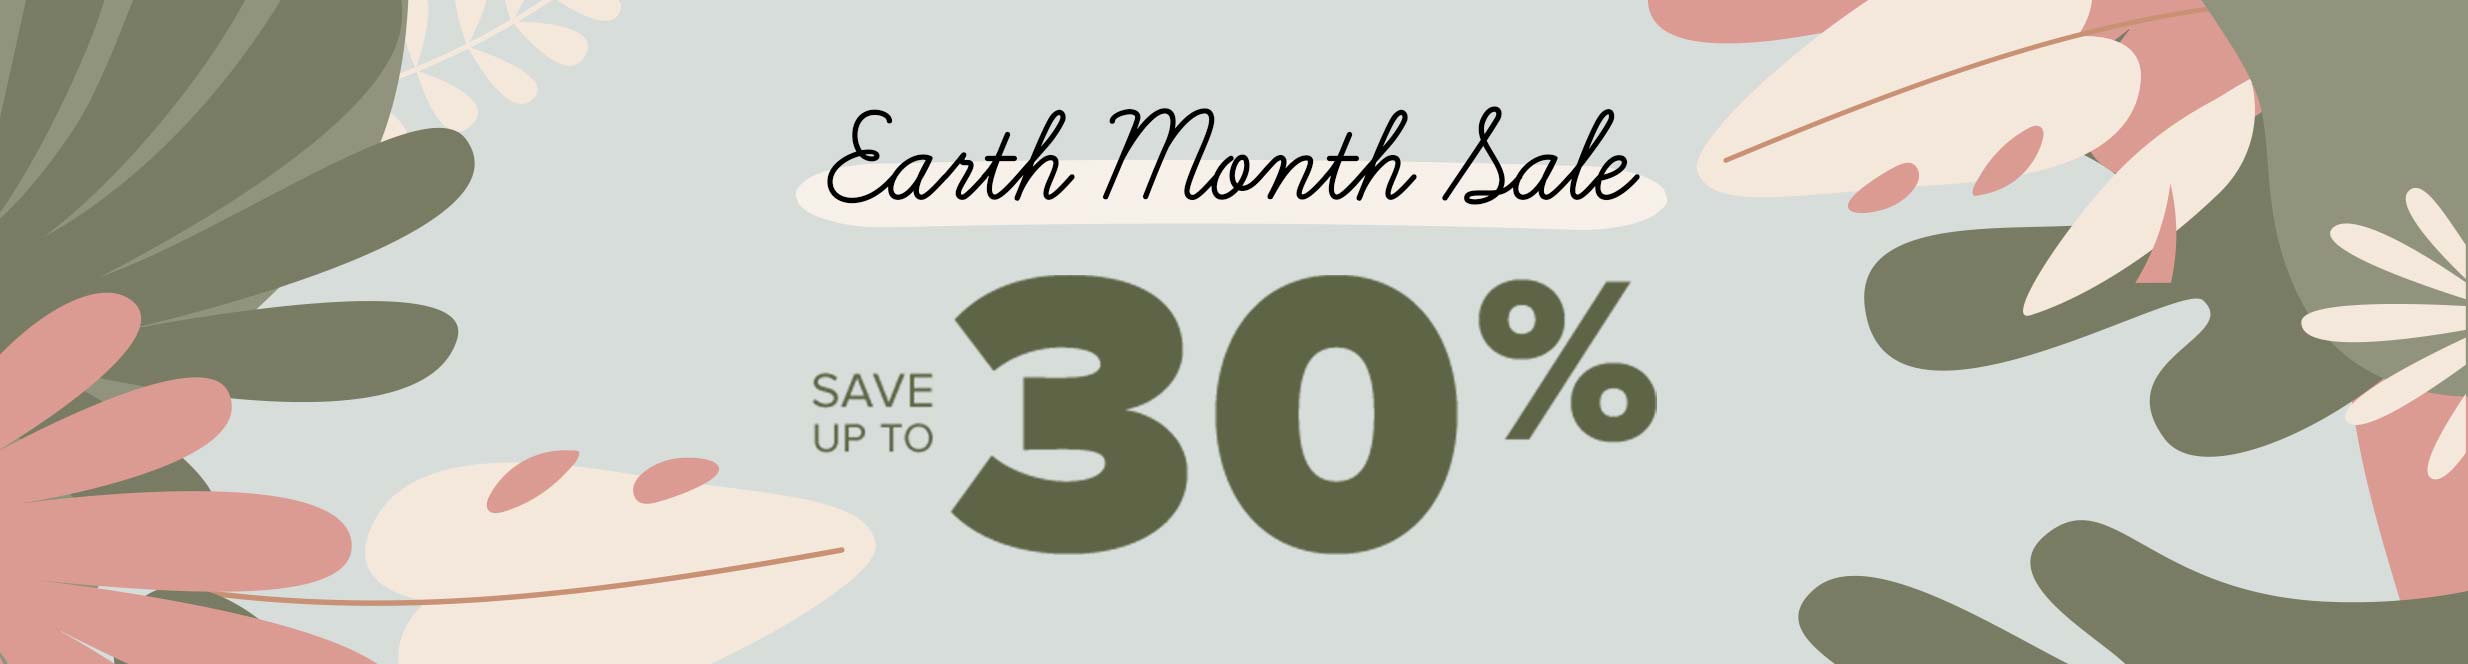 Earth Month Sale - Save up to 30%